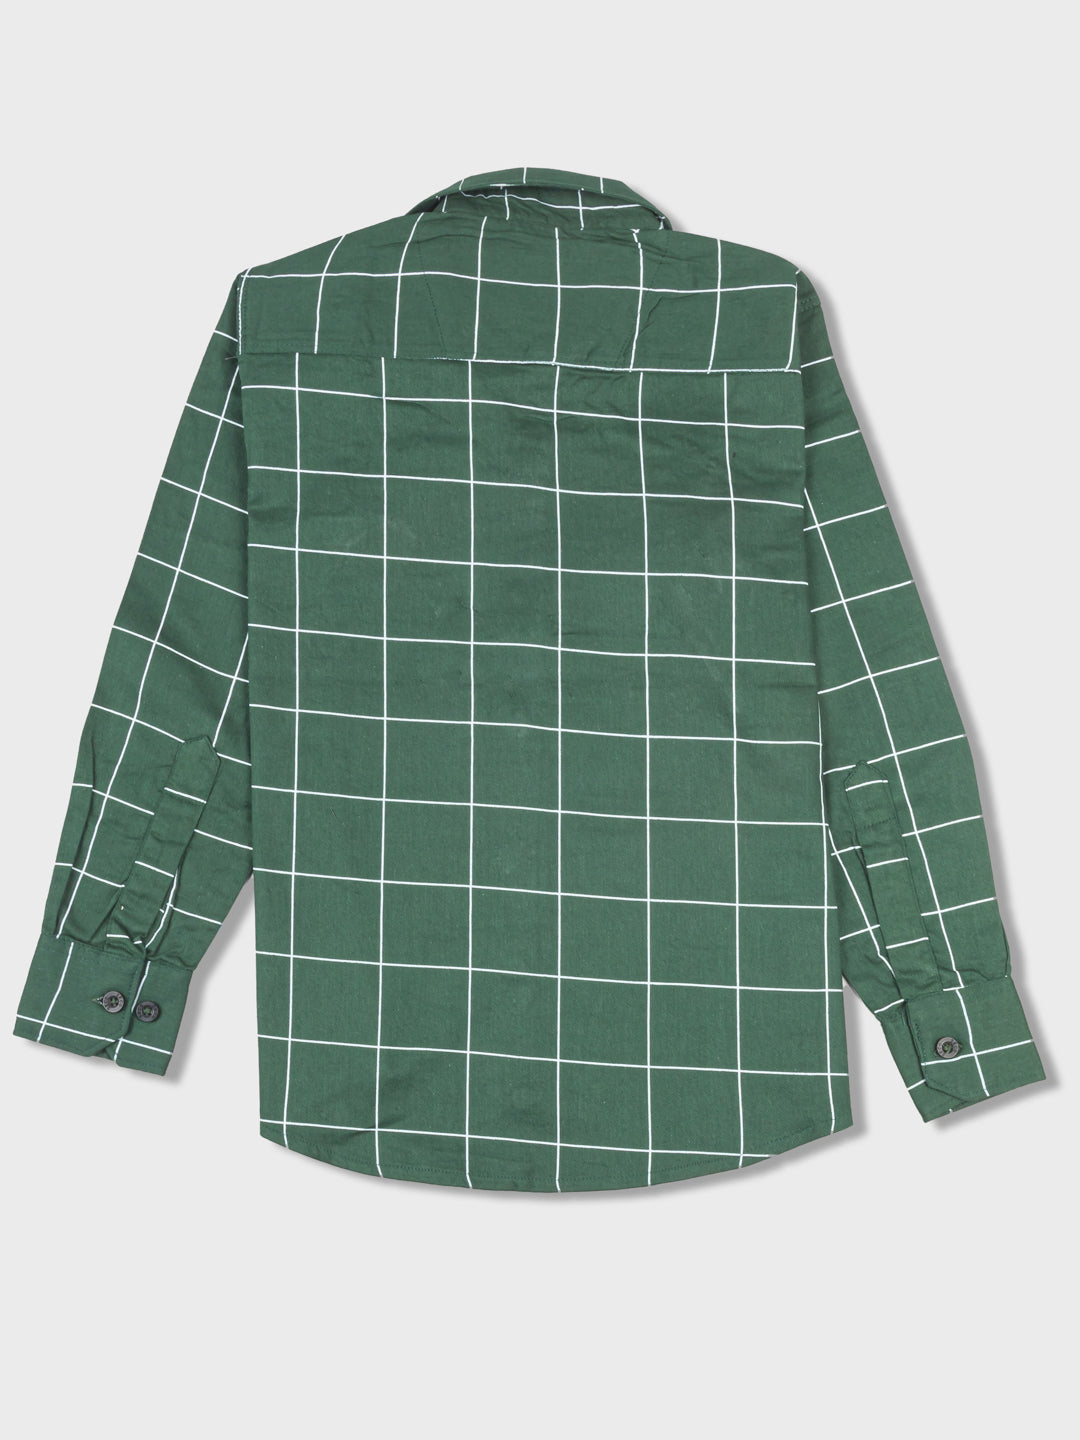 Kid's Olive Green Window Checked Shirt